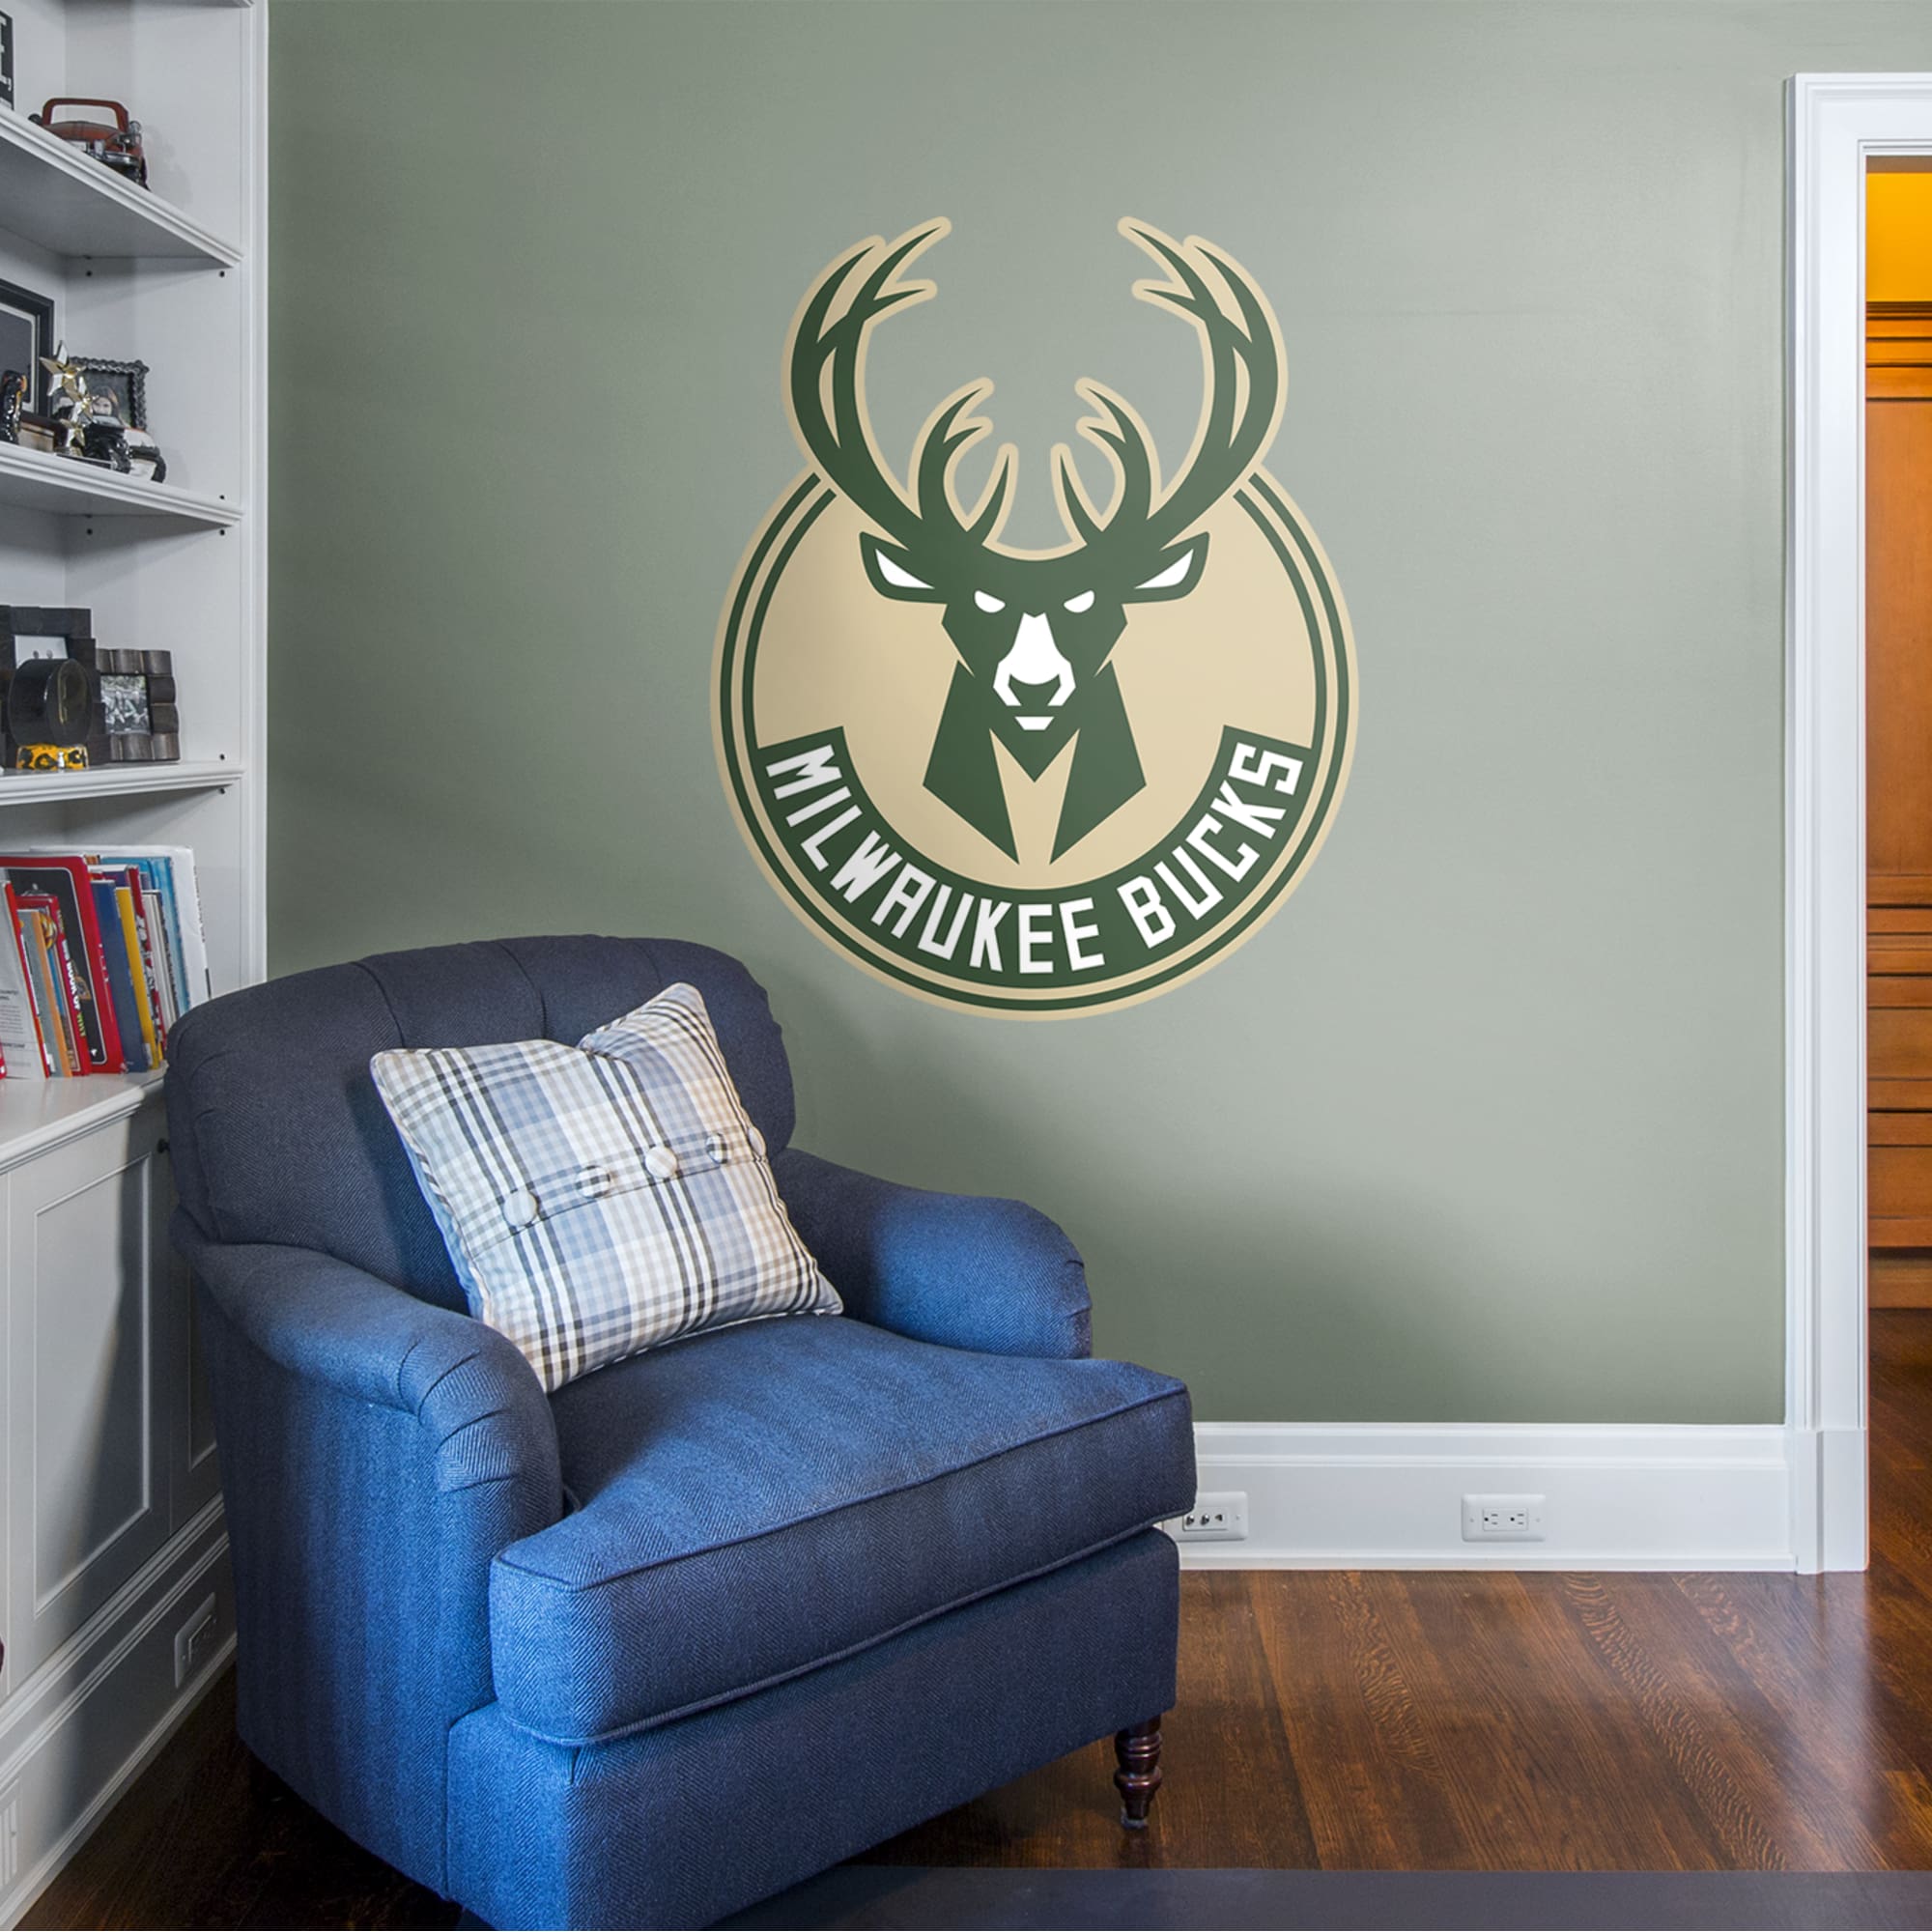 Milwaukee Bucks: Logo - Officially Licensed NBA Removable Wall Decal Giant Logo (38"W x 47"H) by Fathead | Vinyl